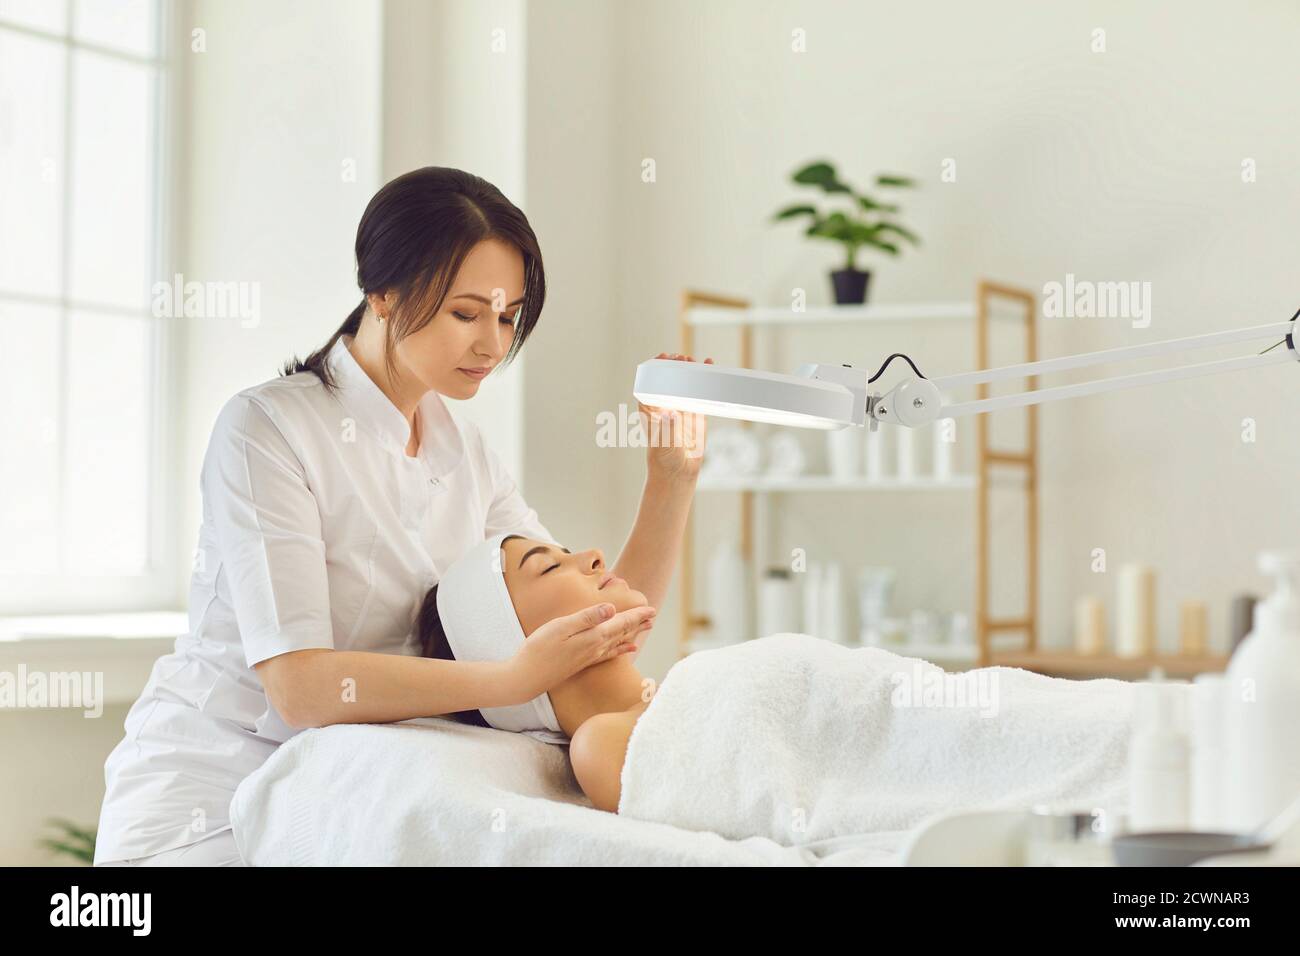 Smiling dermatologist looking at young womans face during skin examination Stock Photo